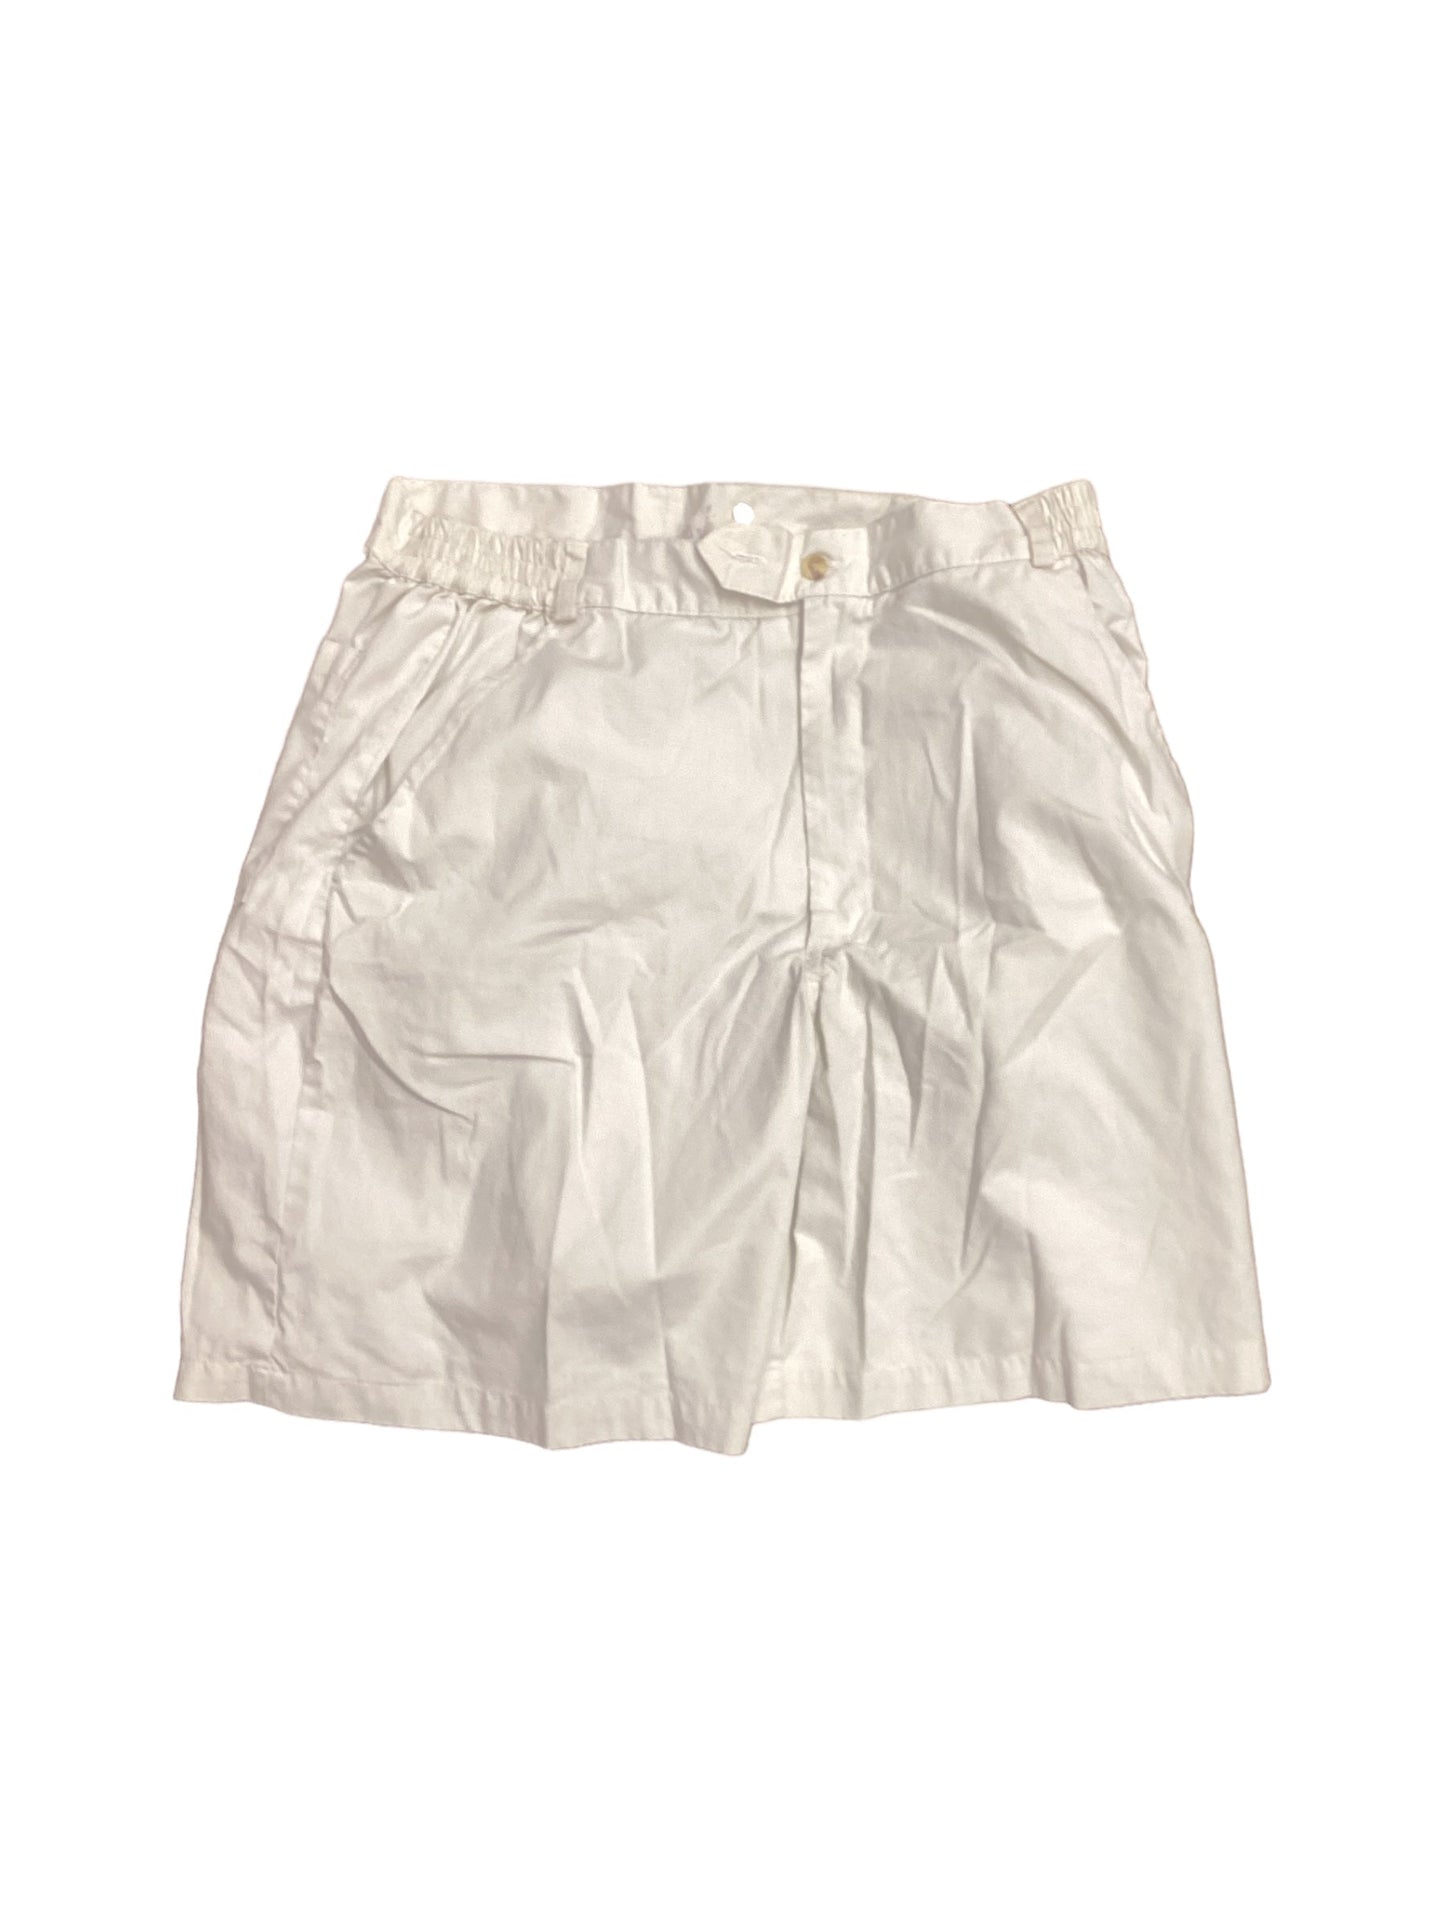 Beige Shorts Clothes Mentor, Size 1x